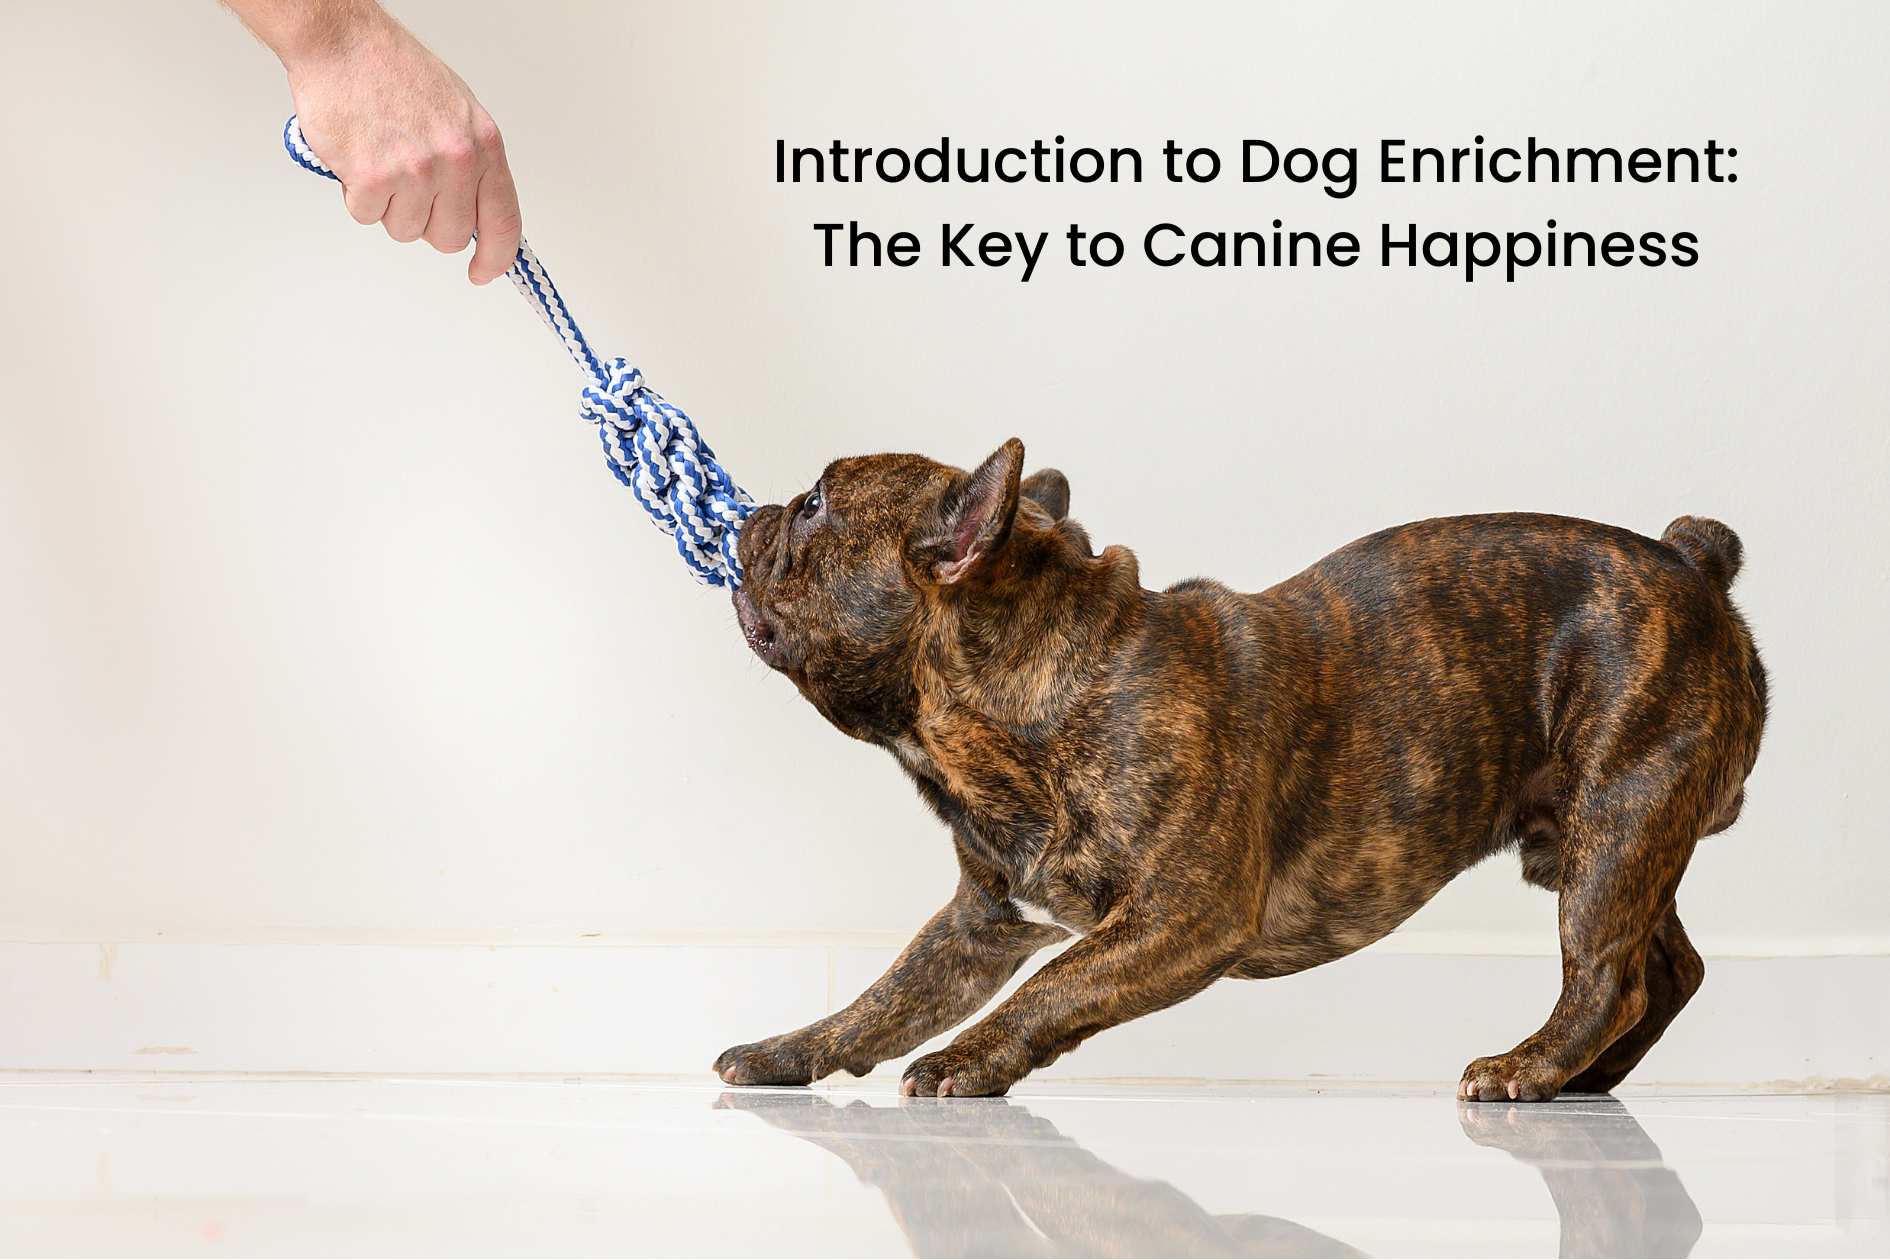 Introduction to Dog Enrichment The Key to Canine Happiness